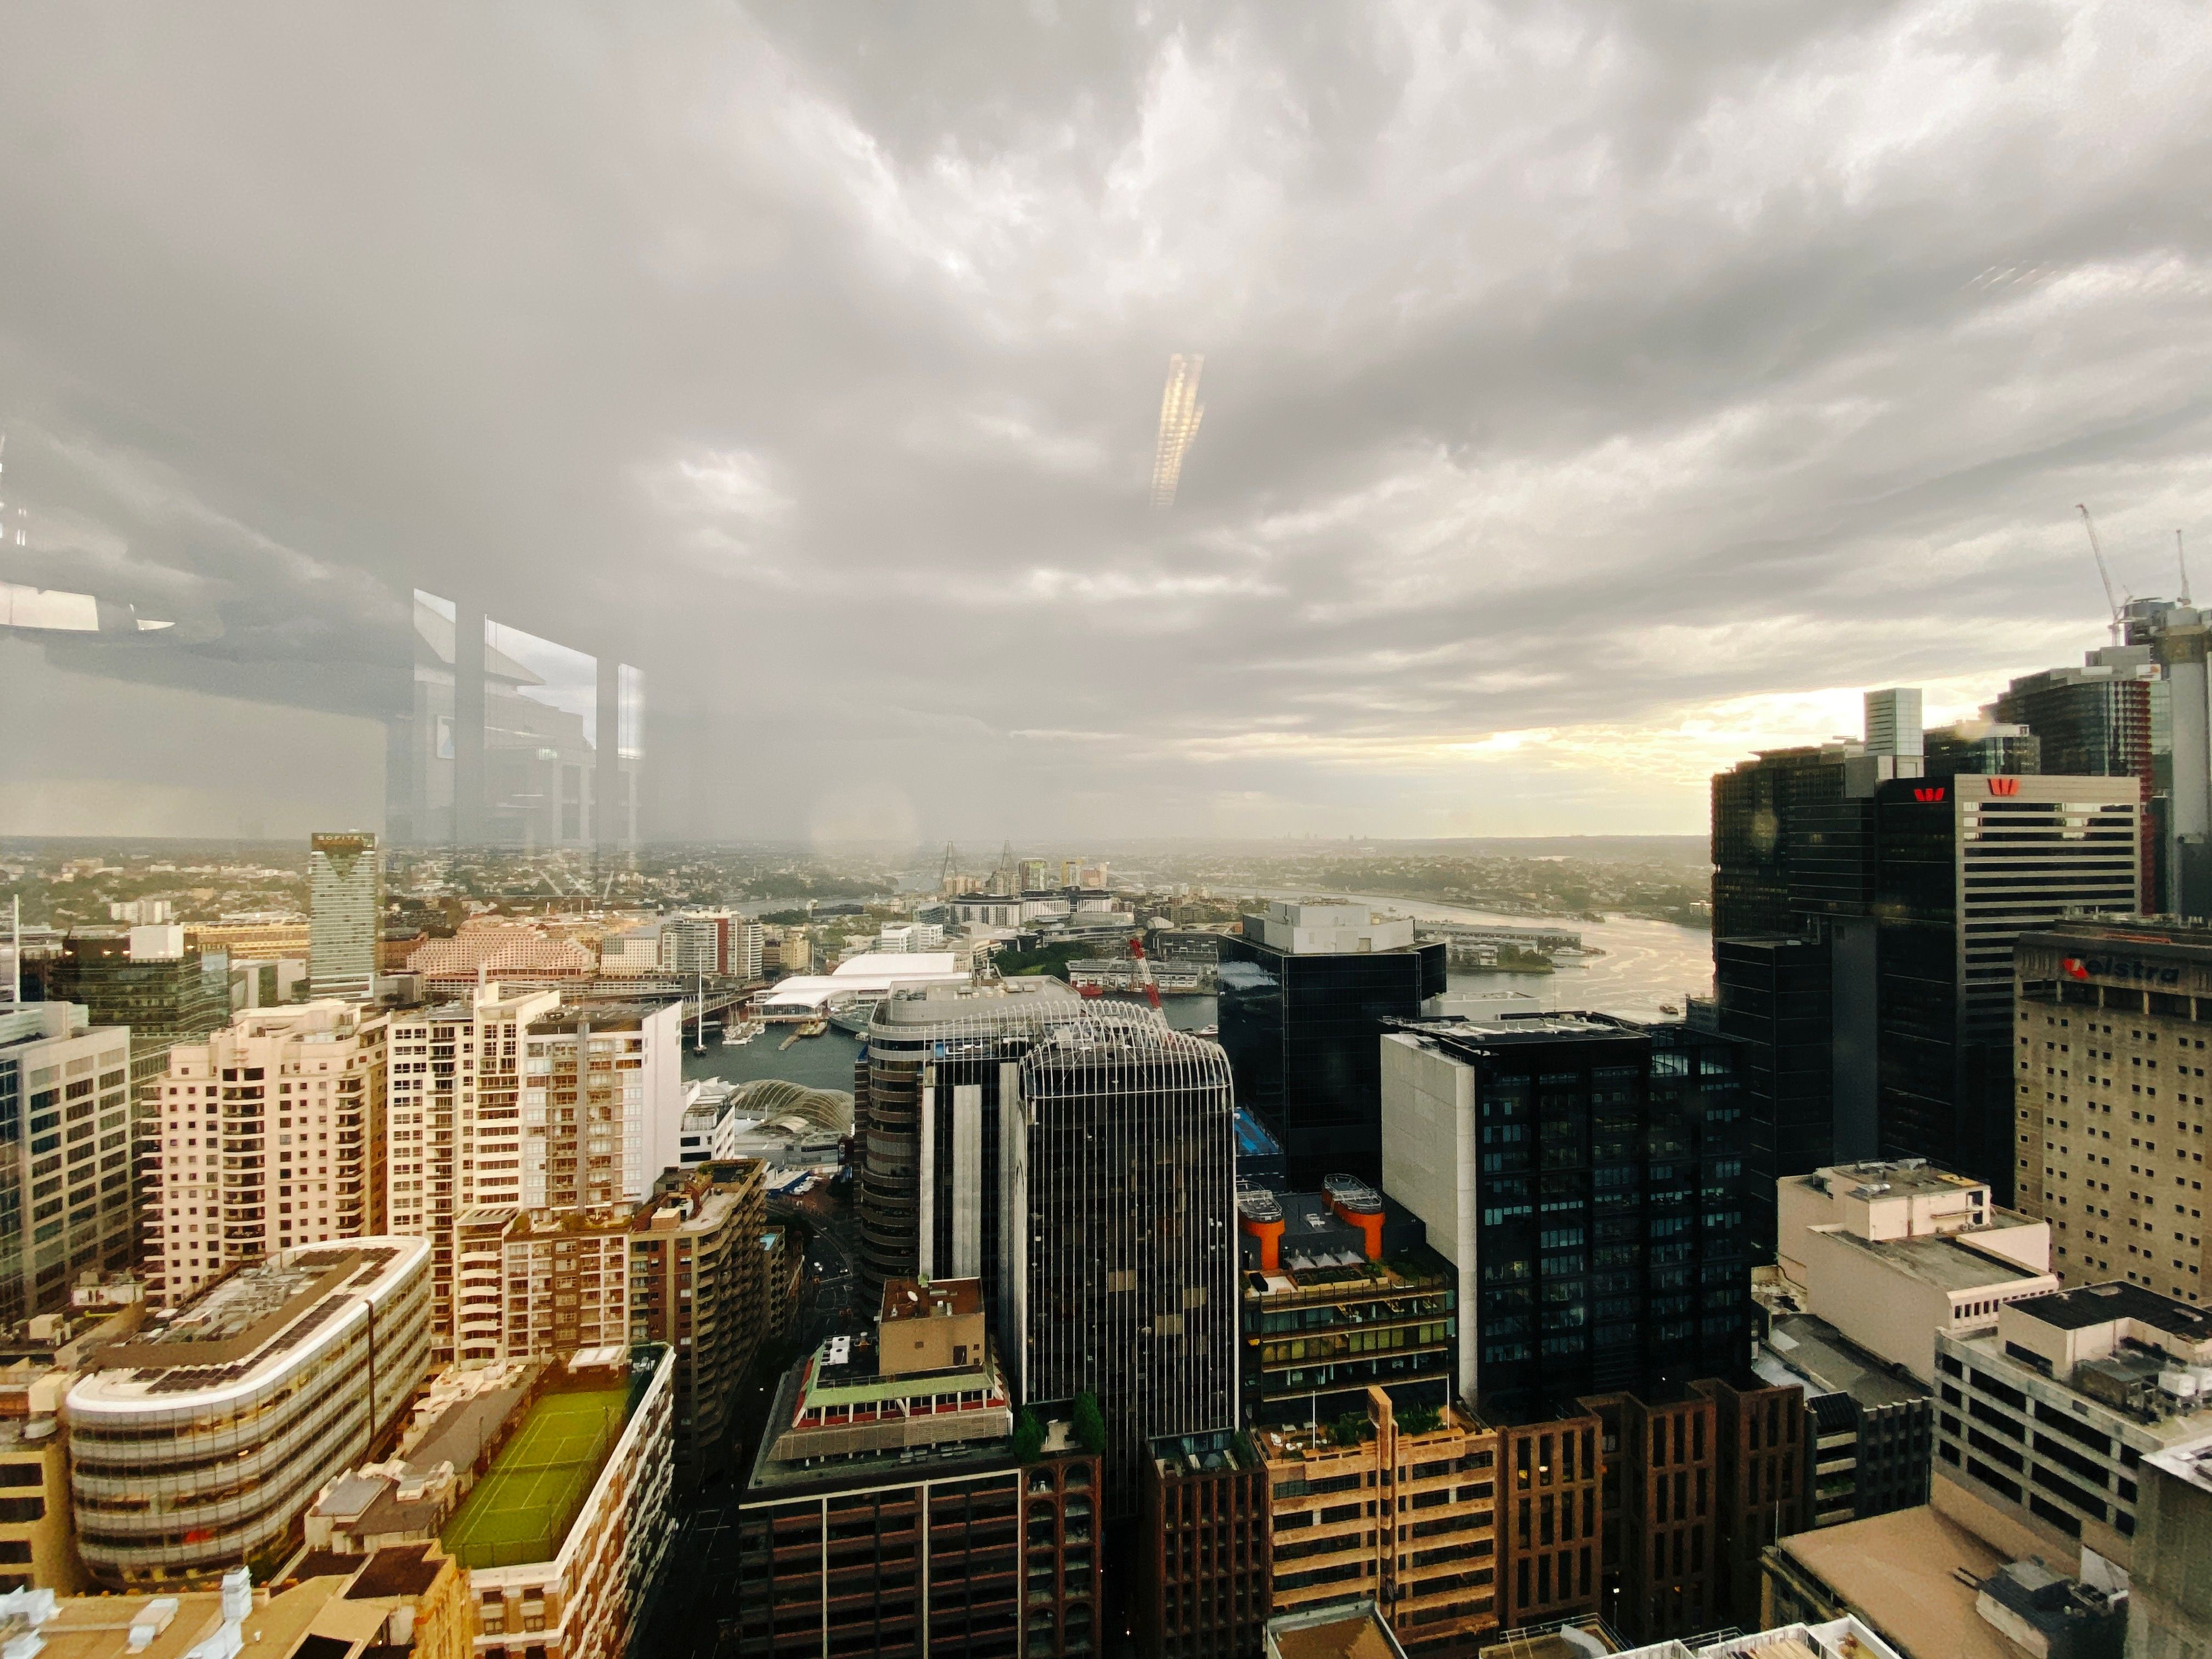 A view looking out west over Sydney from the 30th floor of our office building. The sky is very cloudy and angry-looking, and it's bucketing down with rain in the distance.